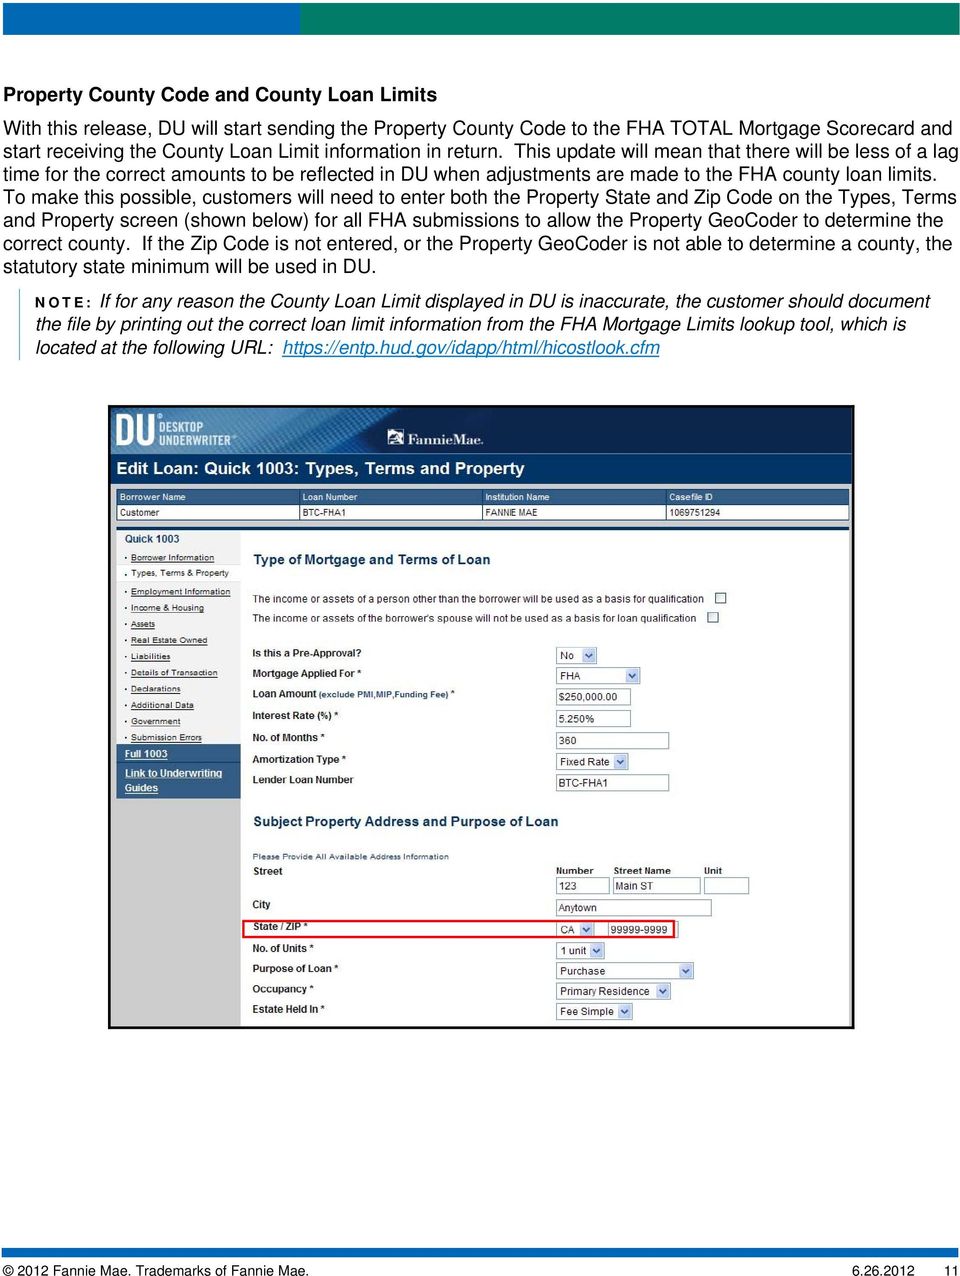 To make this possible, customers will need to enter both the Property State and Zip Code on the Types, Terms and Property screen (shown below) for all FHA submissions to allow the Property GeoCoder